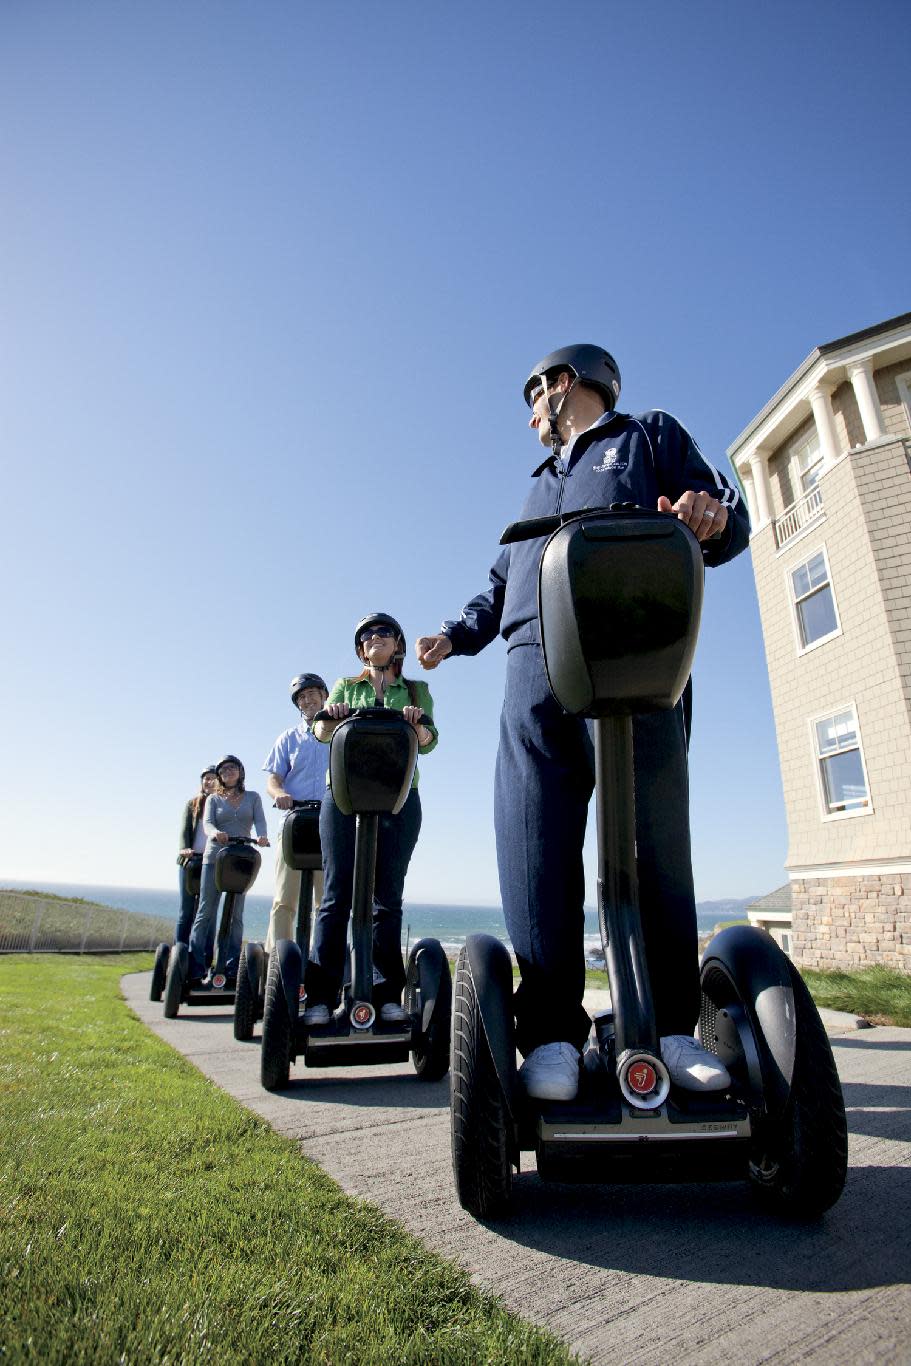 This 2010 photo provided by the Ritz-Carlton Half-Moon Bay shows a hotel recreational staff member leading a group of hotel guests on a Segway tour of the Coastal Trail in Half-Moon Bay, Calif., on the Pacific Ocean with the hotel property on a nearby cliff. A number of hotels offer Segway tours as a novel way to see their grounds and nearby scenic areas. (AP Photo/Ritz-Carlton)